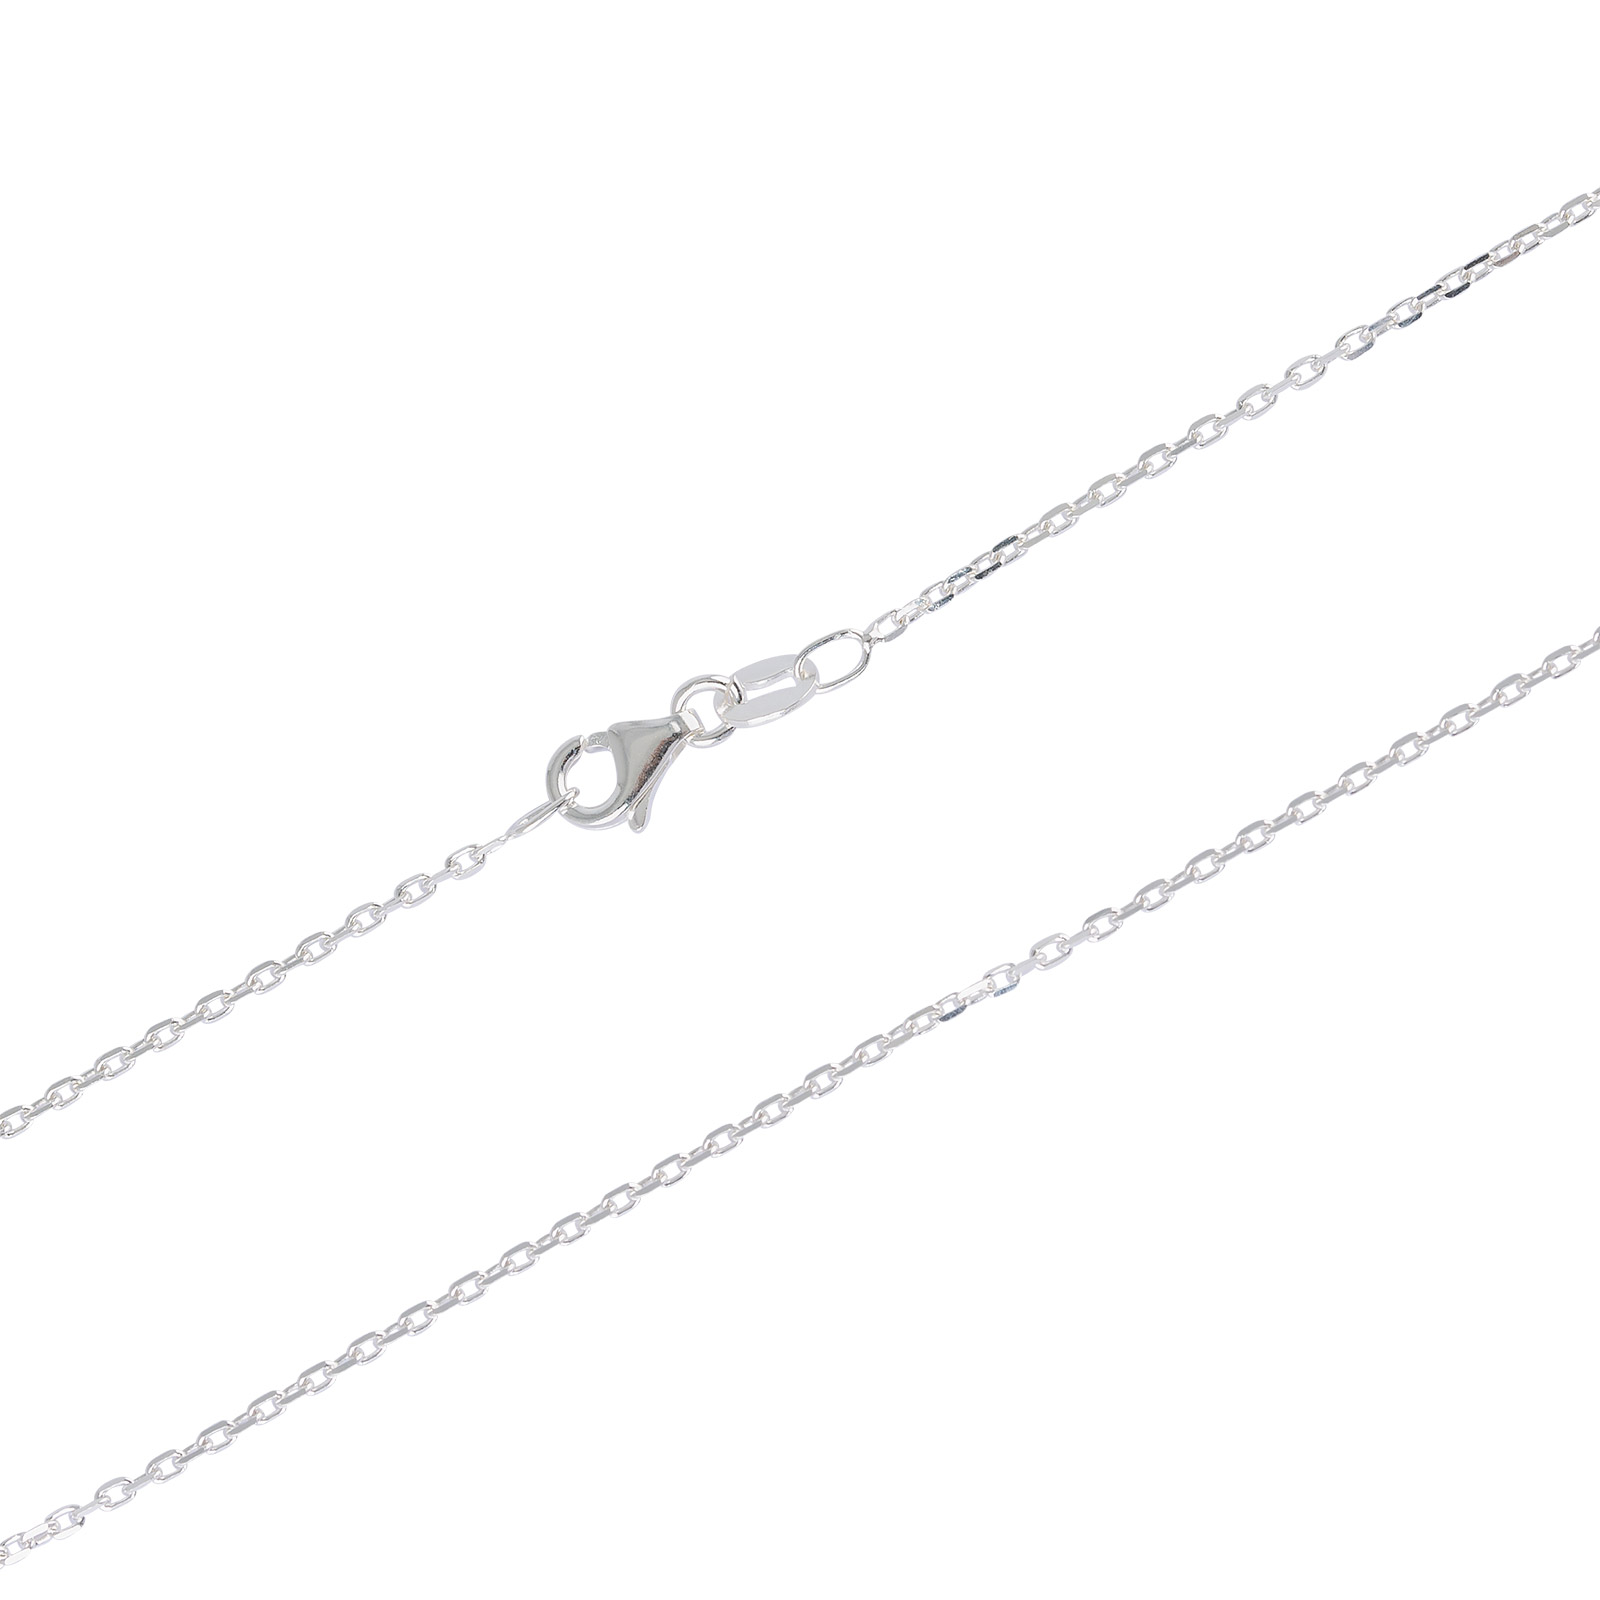 Namnhalsband silver 925 Sterling silver - Arabisk text